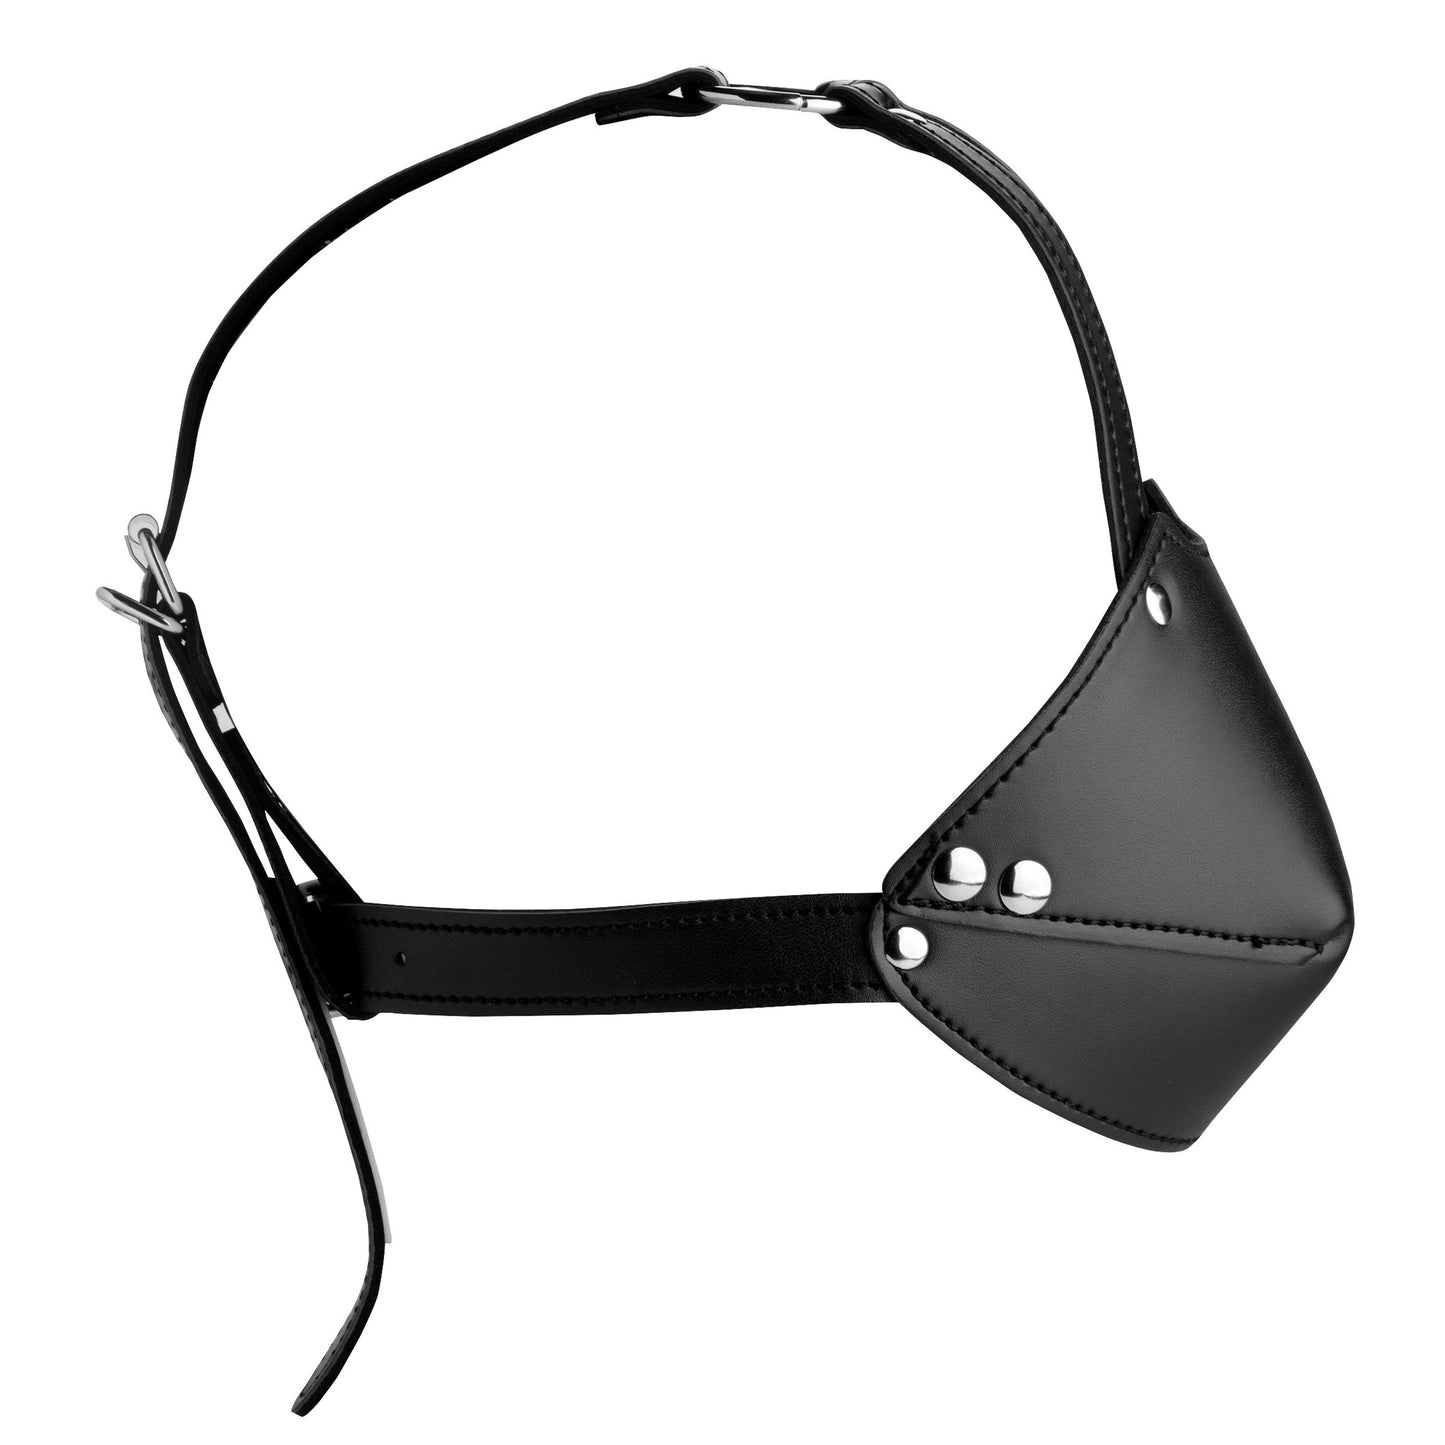 Mouth Harness with Ball Gag - UABDSM